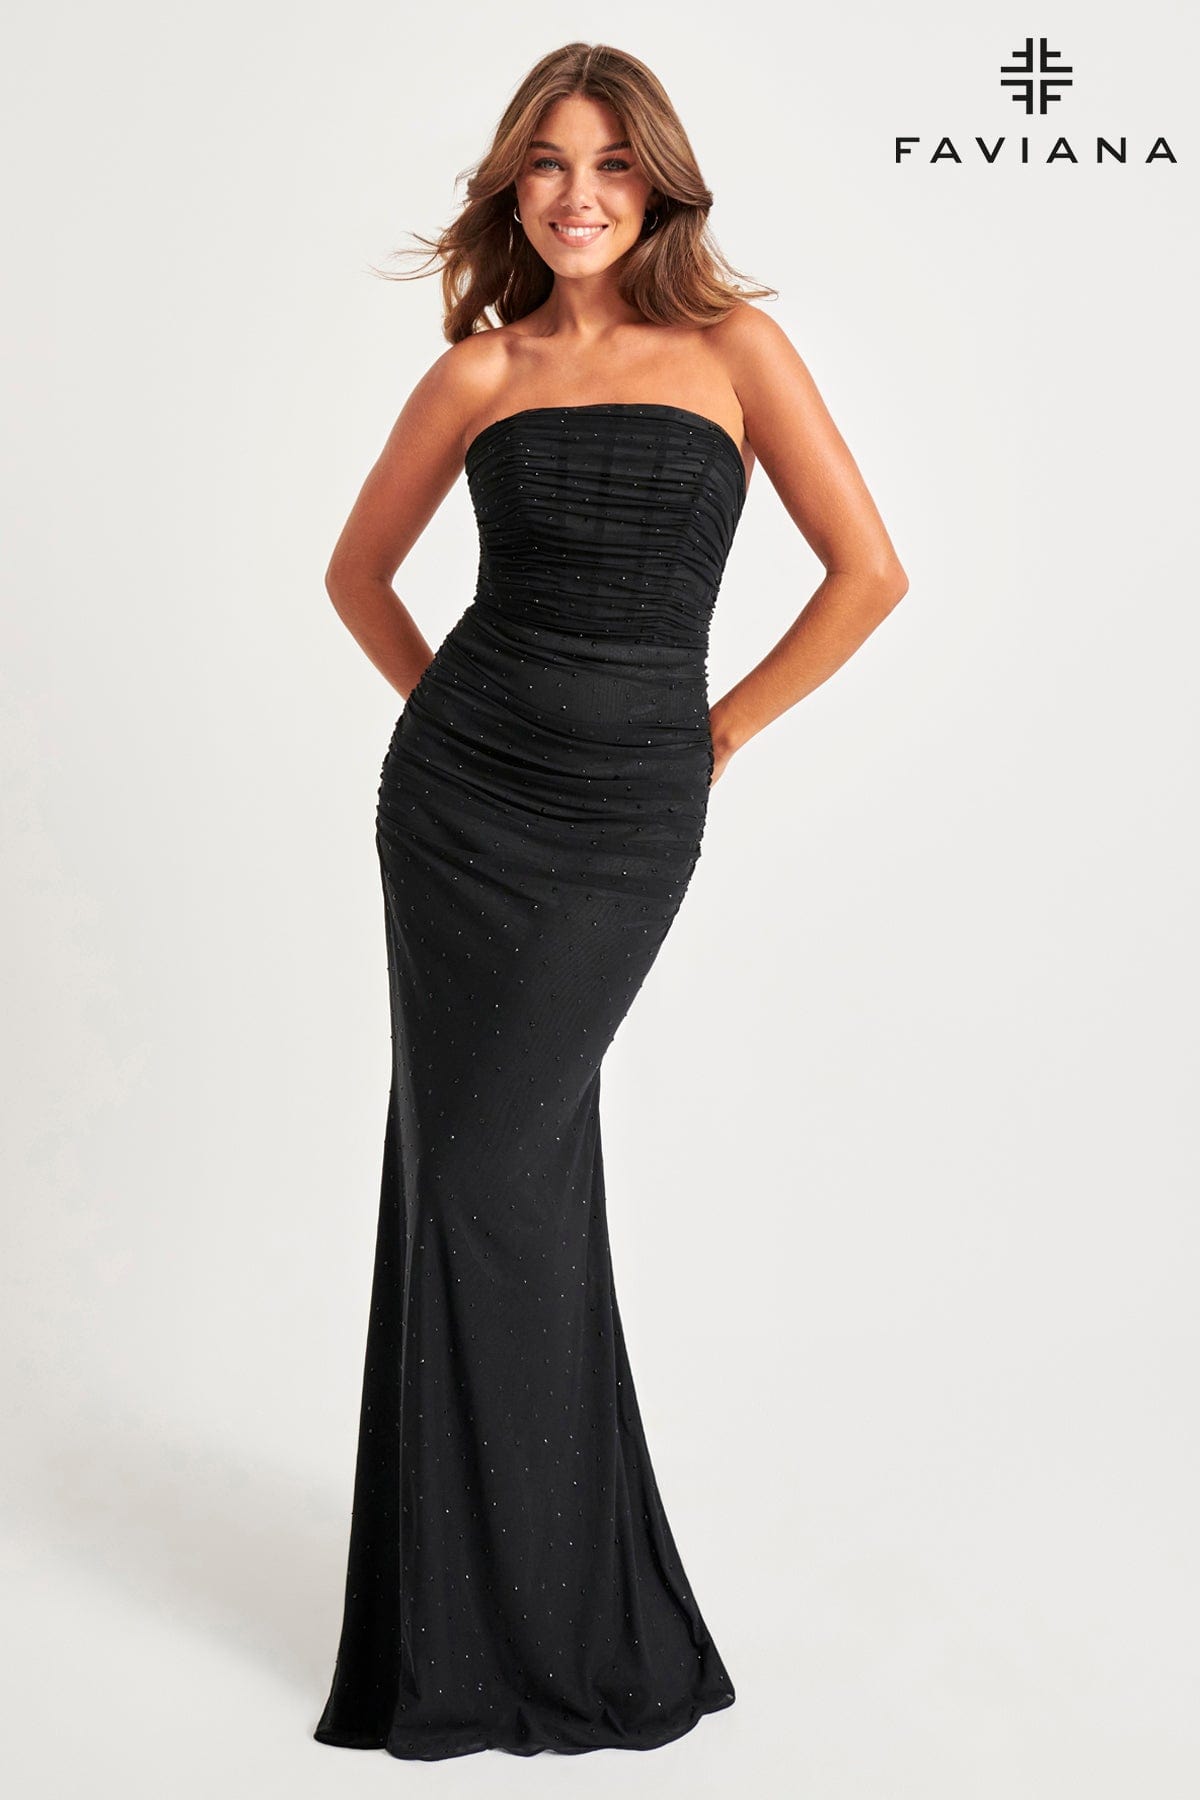 Strapless Mesh Dress With Exposed Corset Boning And Sparkly Crystals | 11040